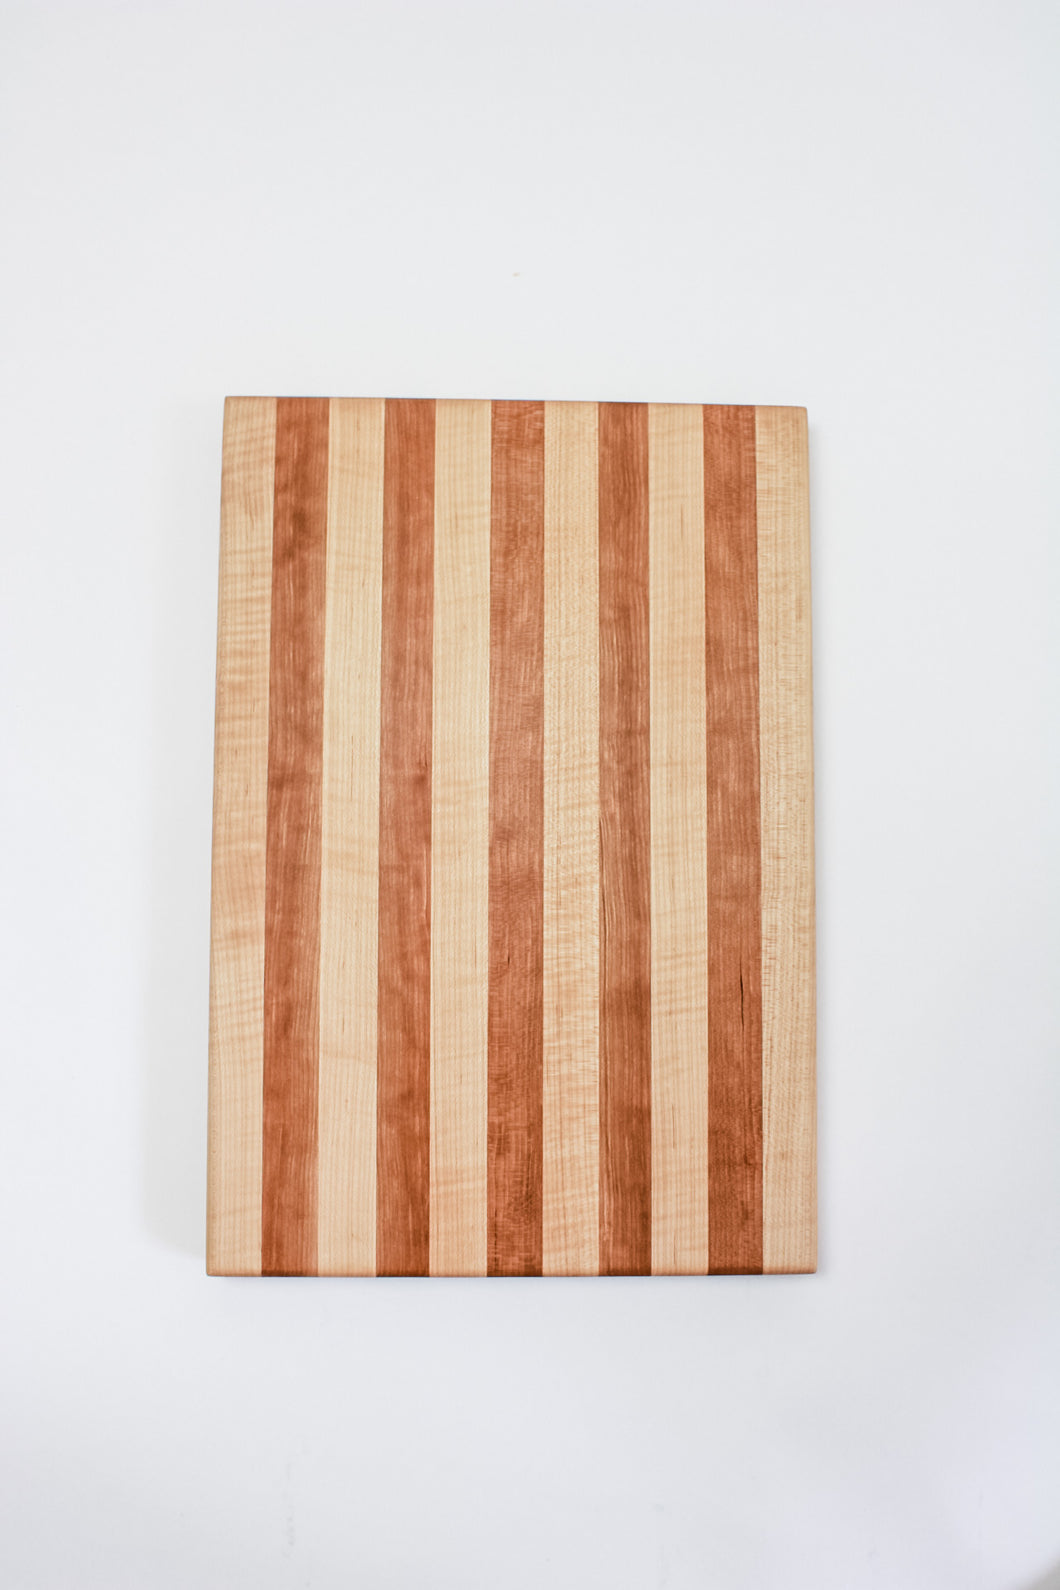 Handmade cutting board with alternating strips of cherry and hard maple wood.